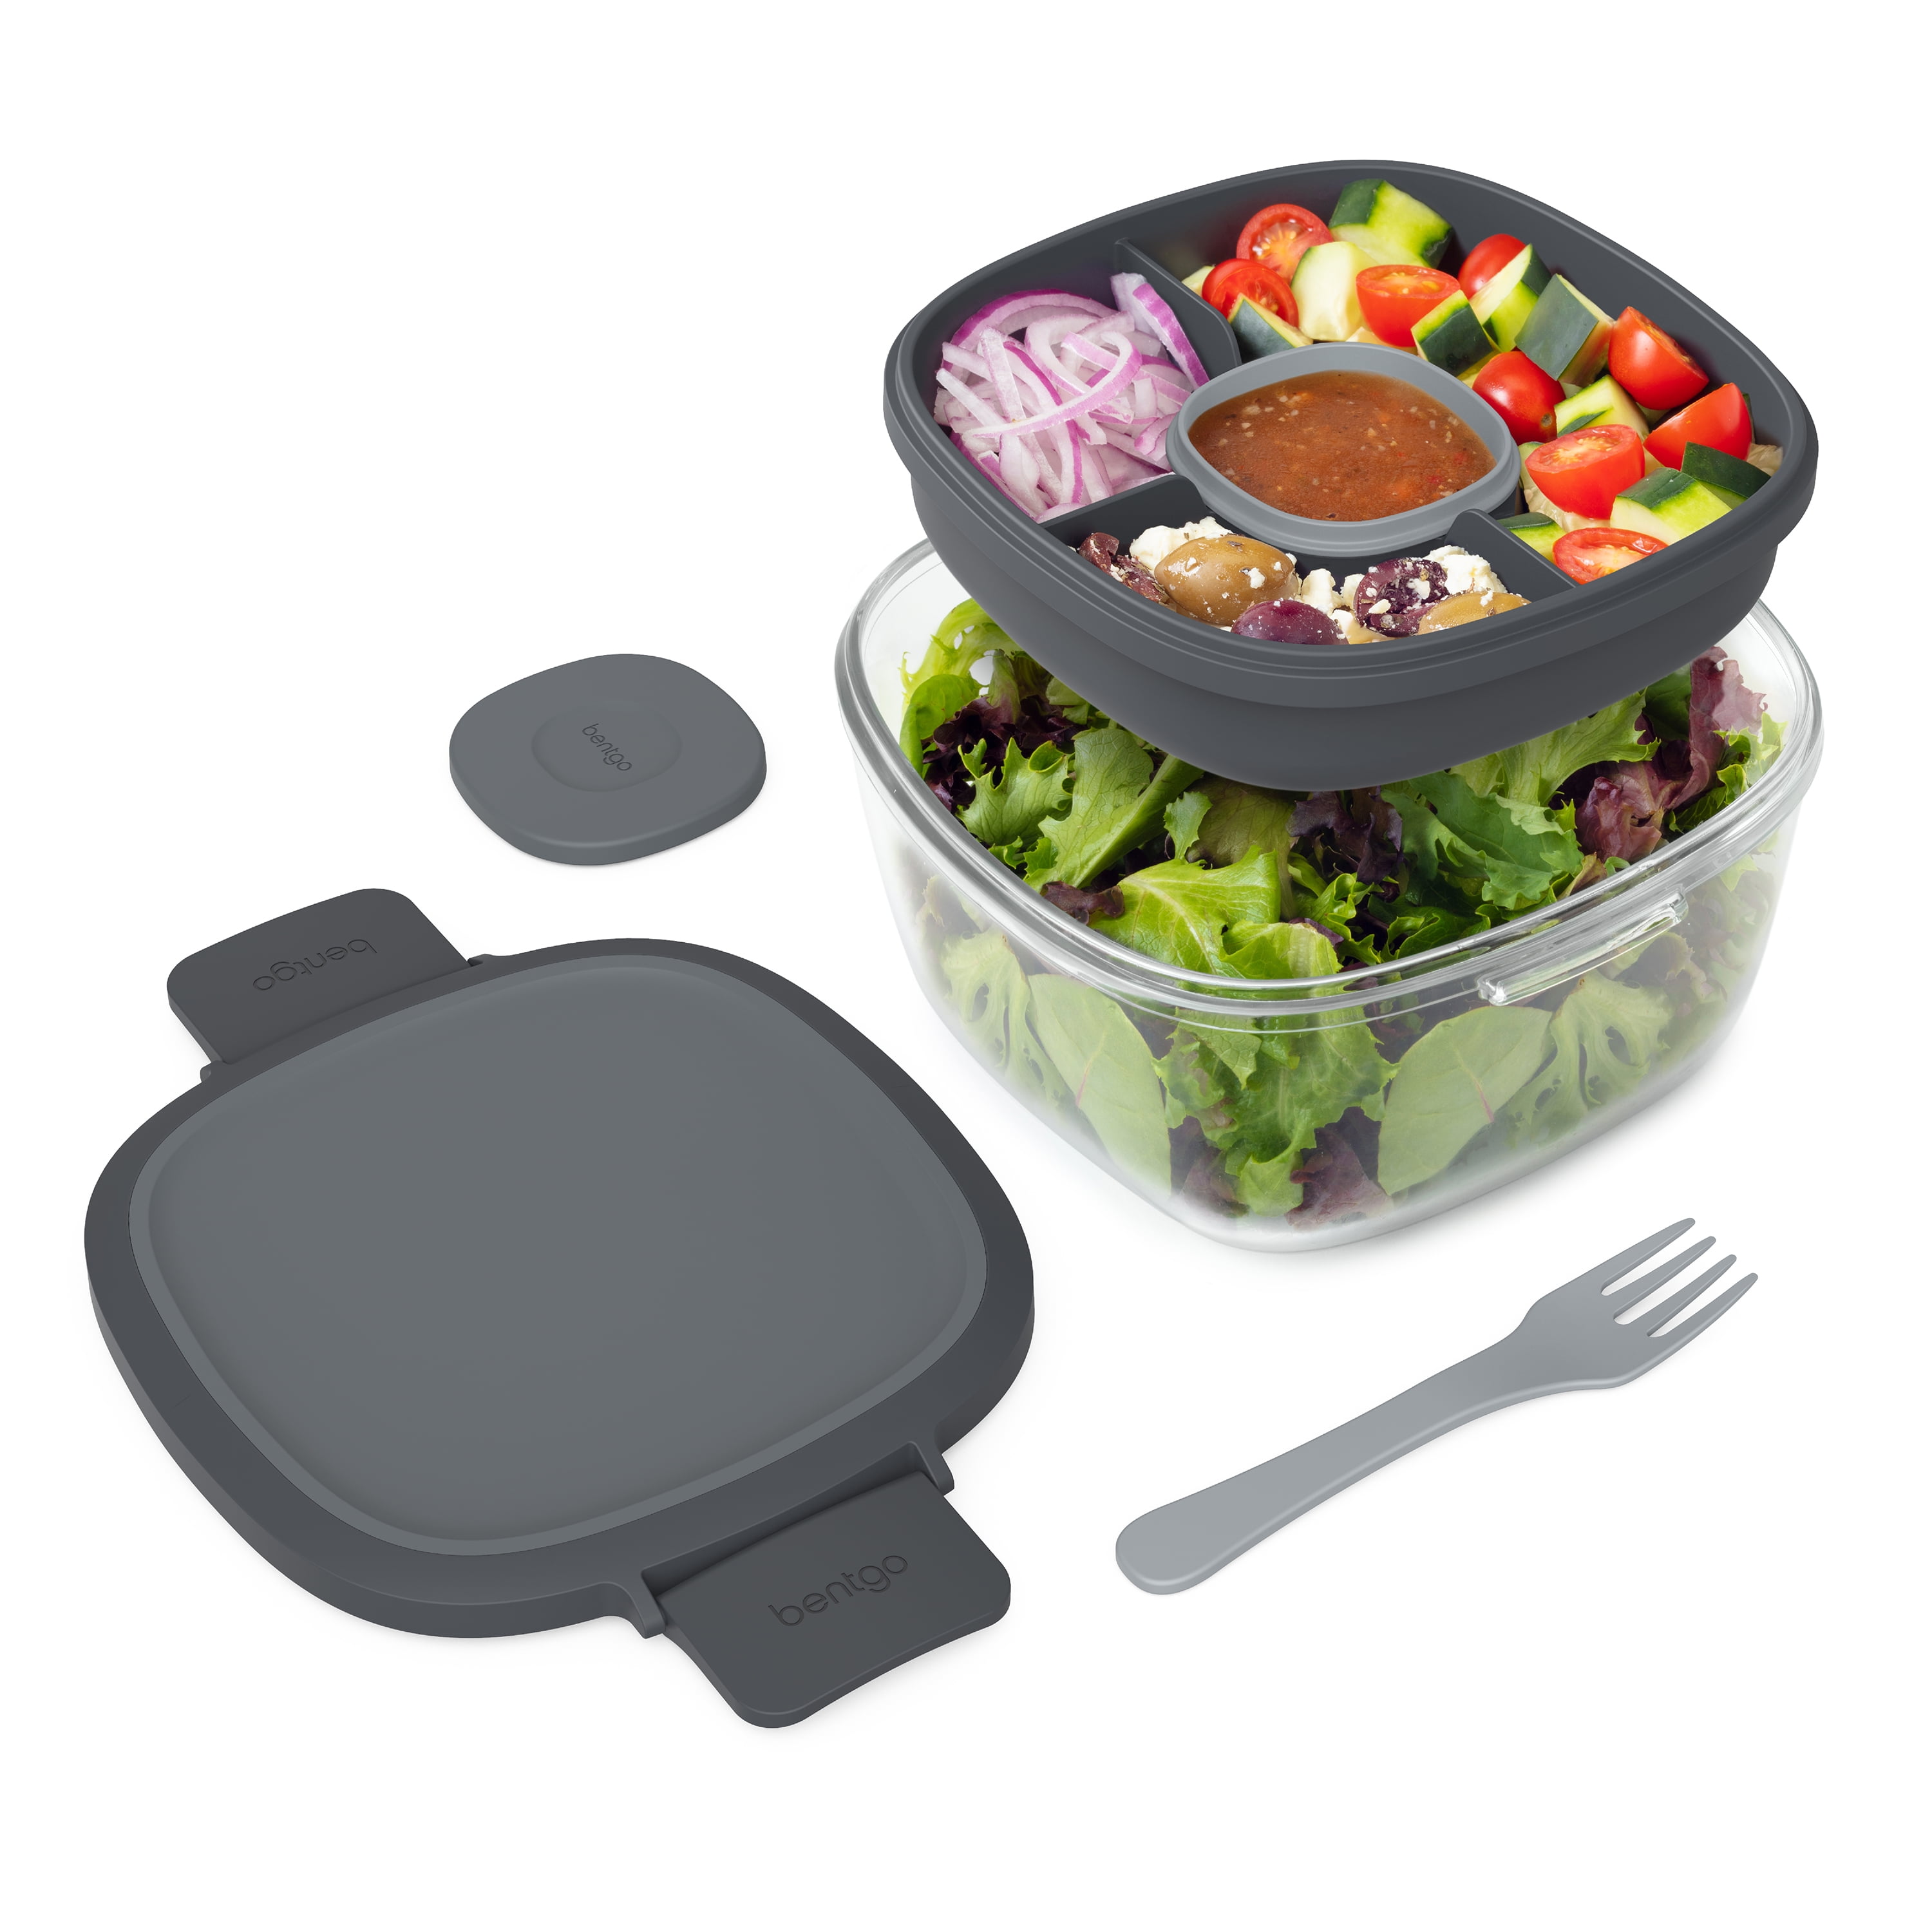 Bentgo® Glass Leak-Proof Set: Must for Meal Planning, Nearly 30